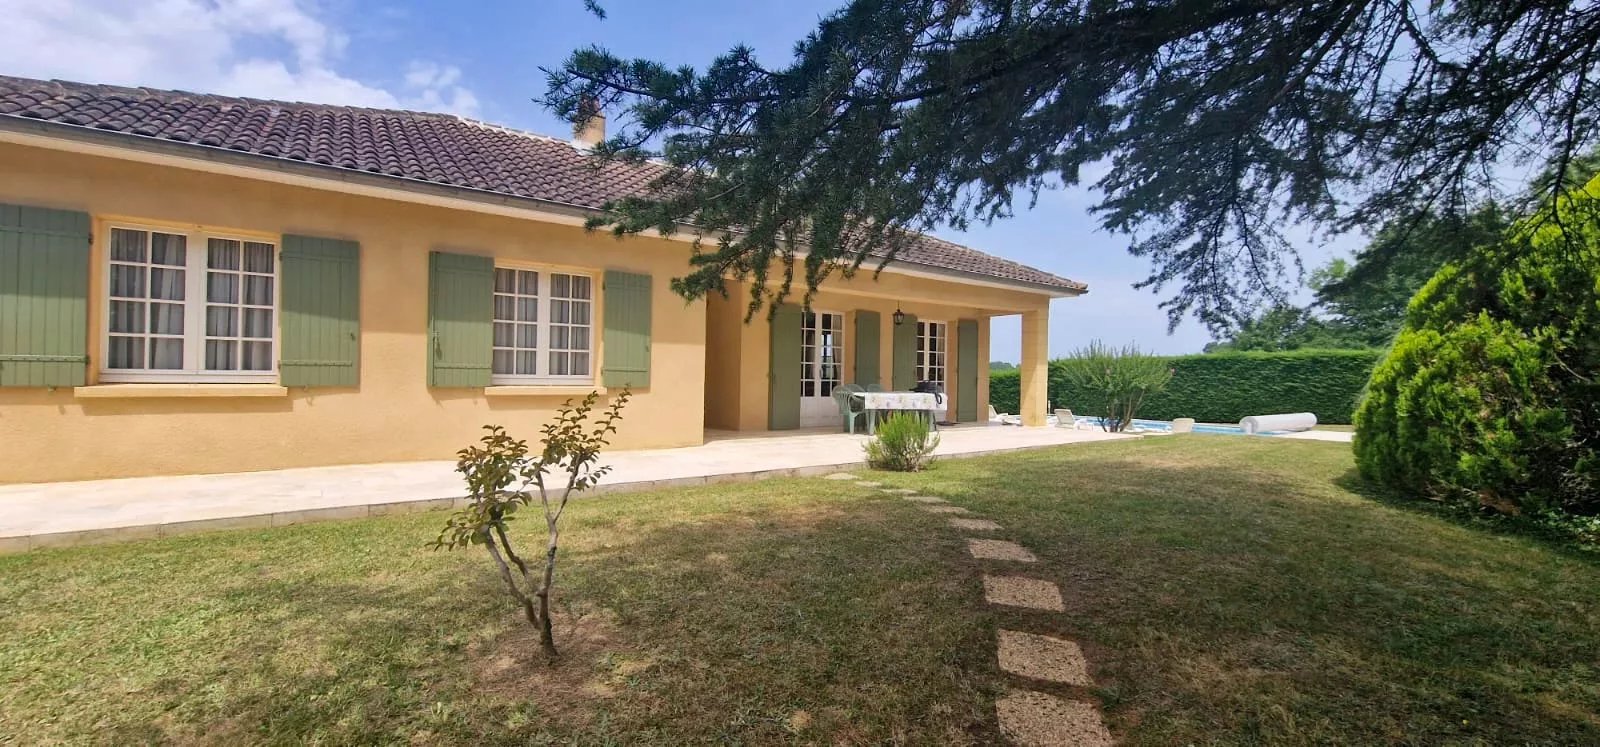 Lovely bright modern house 20 minutes walk to thriving bastide town